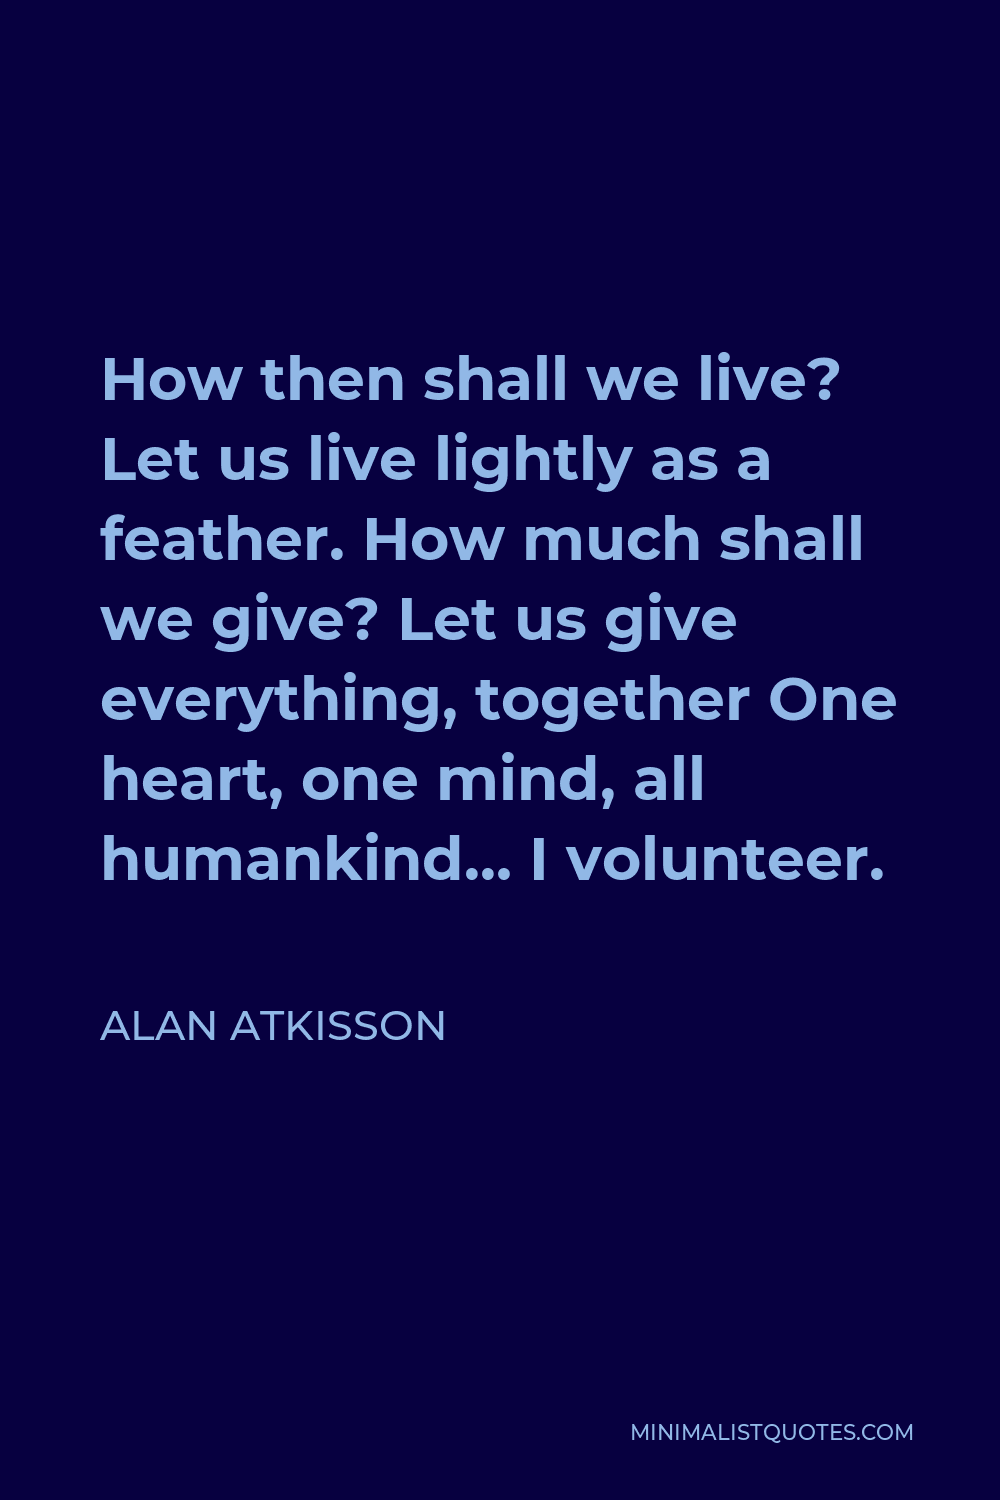 Alan AtKisson Quote - How then shall we live? Let us live lightly as a feather. How much shall we give? Let us give everything, together One heart, one mind, all humankind… I volunteer.